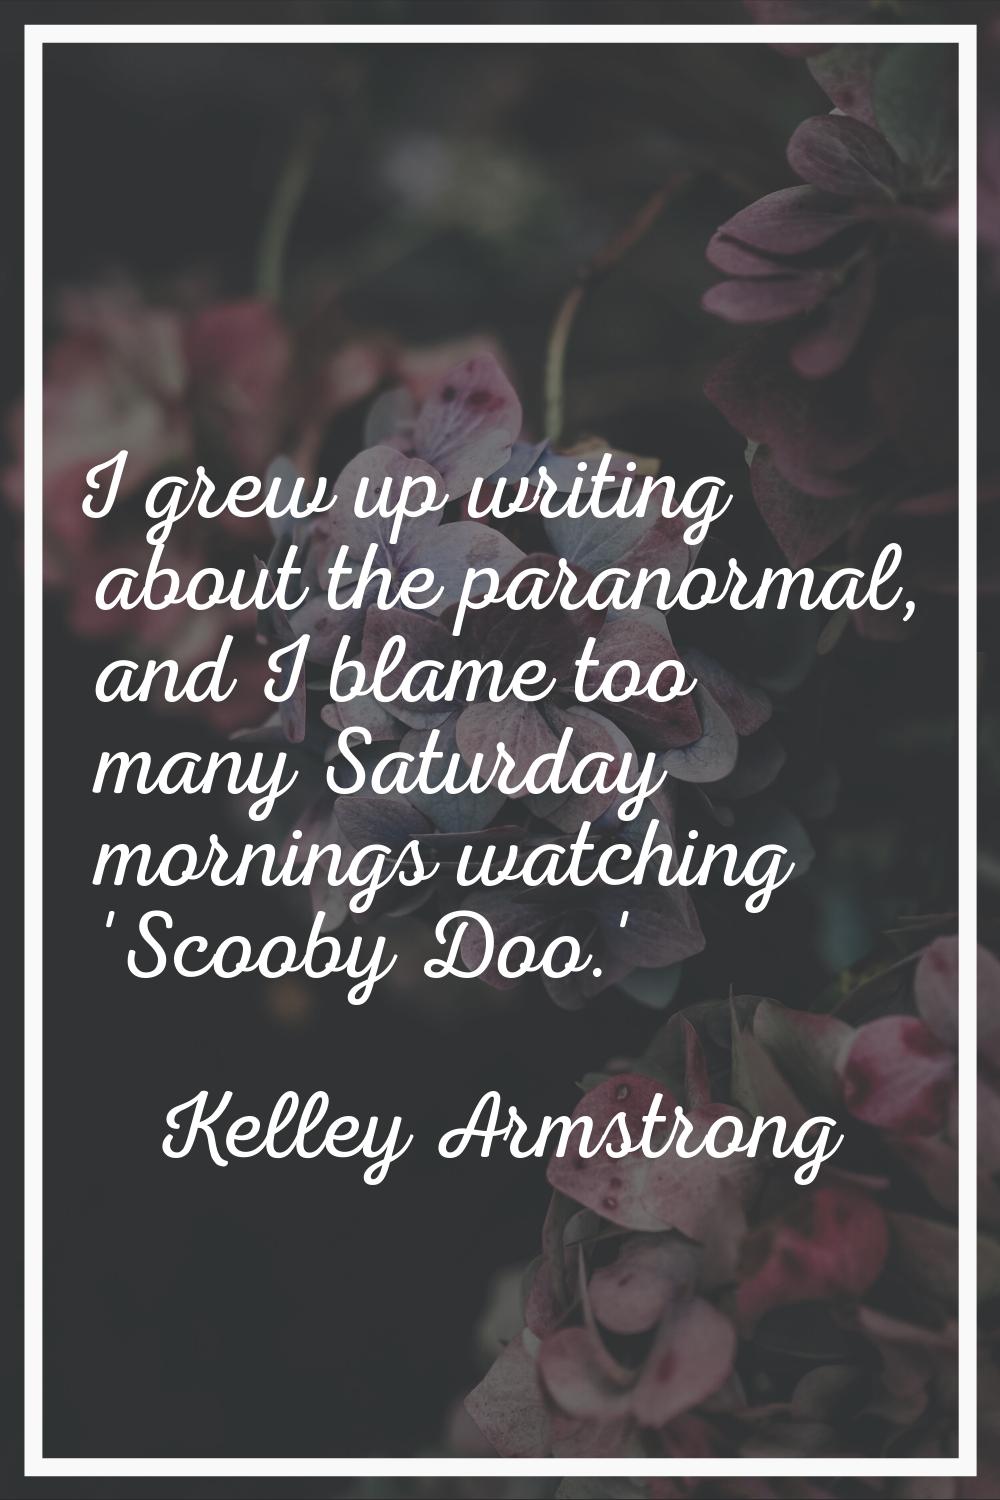 I grew up writing about the paranormal, and I blame too many Saturday mornings watching 'Scooby Doo